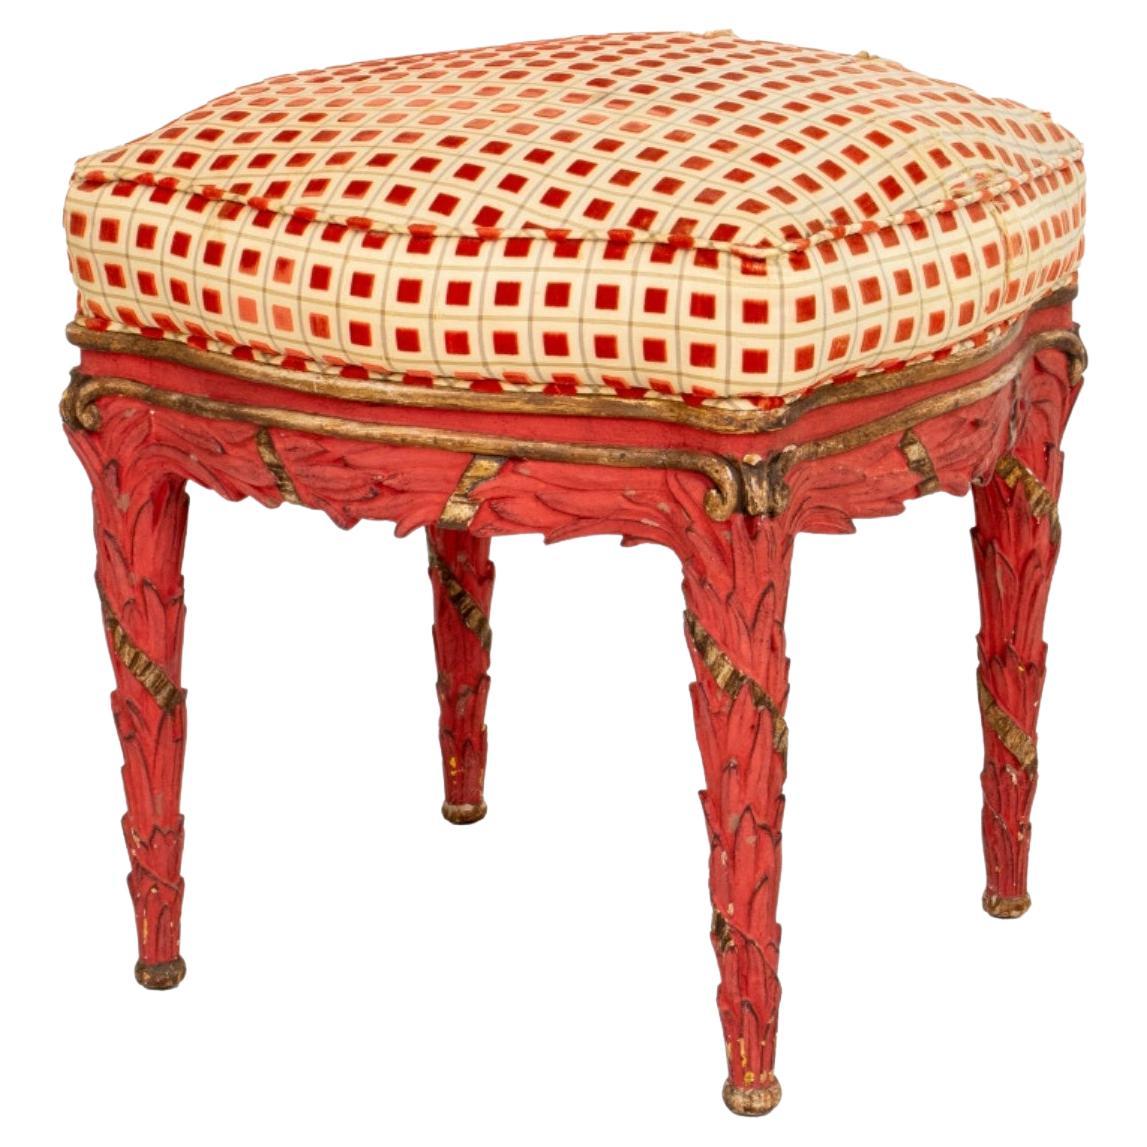 Serge Roche Manner Coral Painted and Gilt Stool